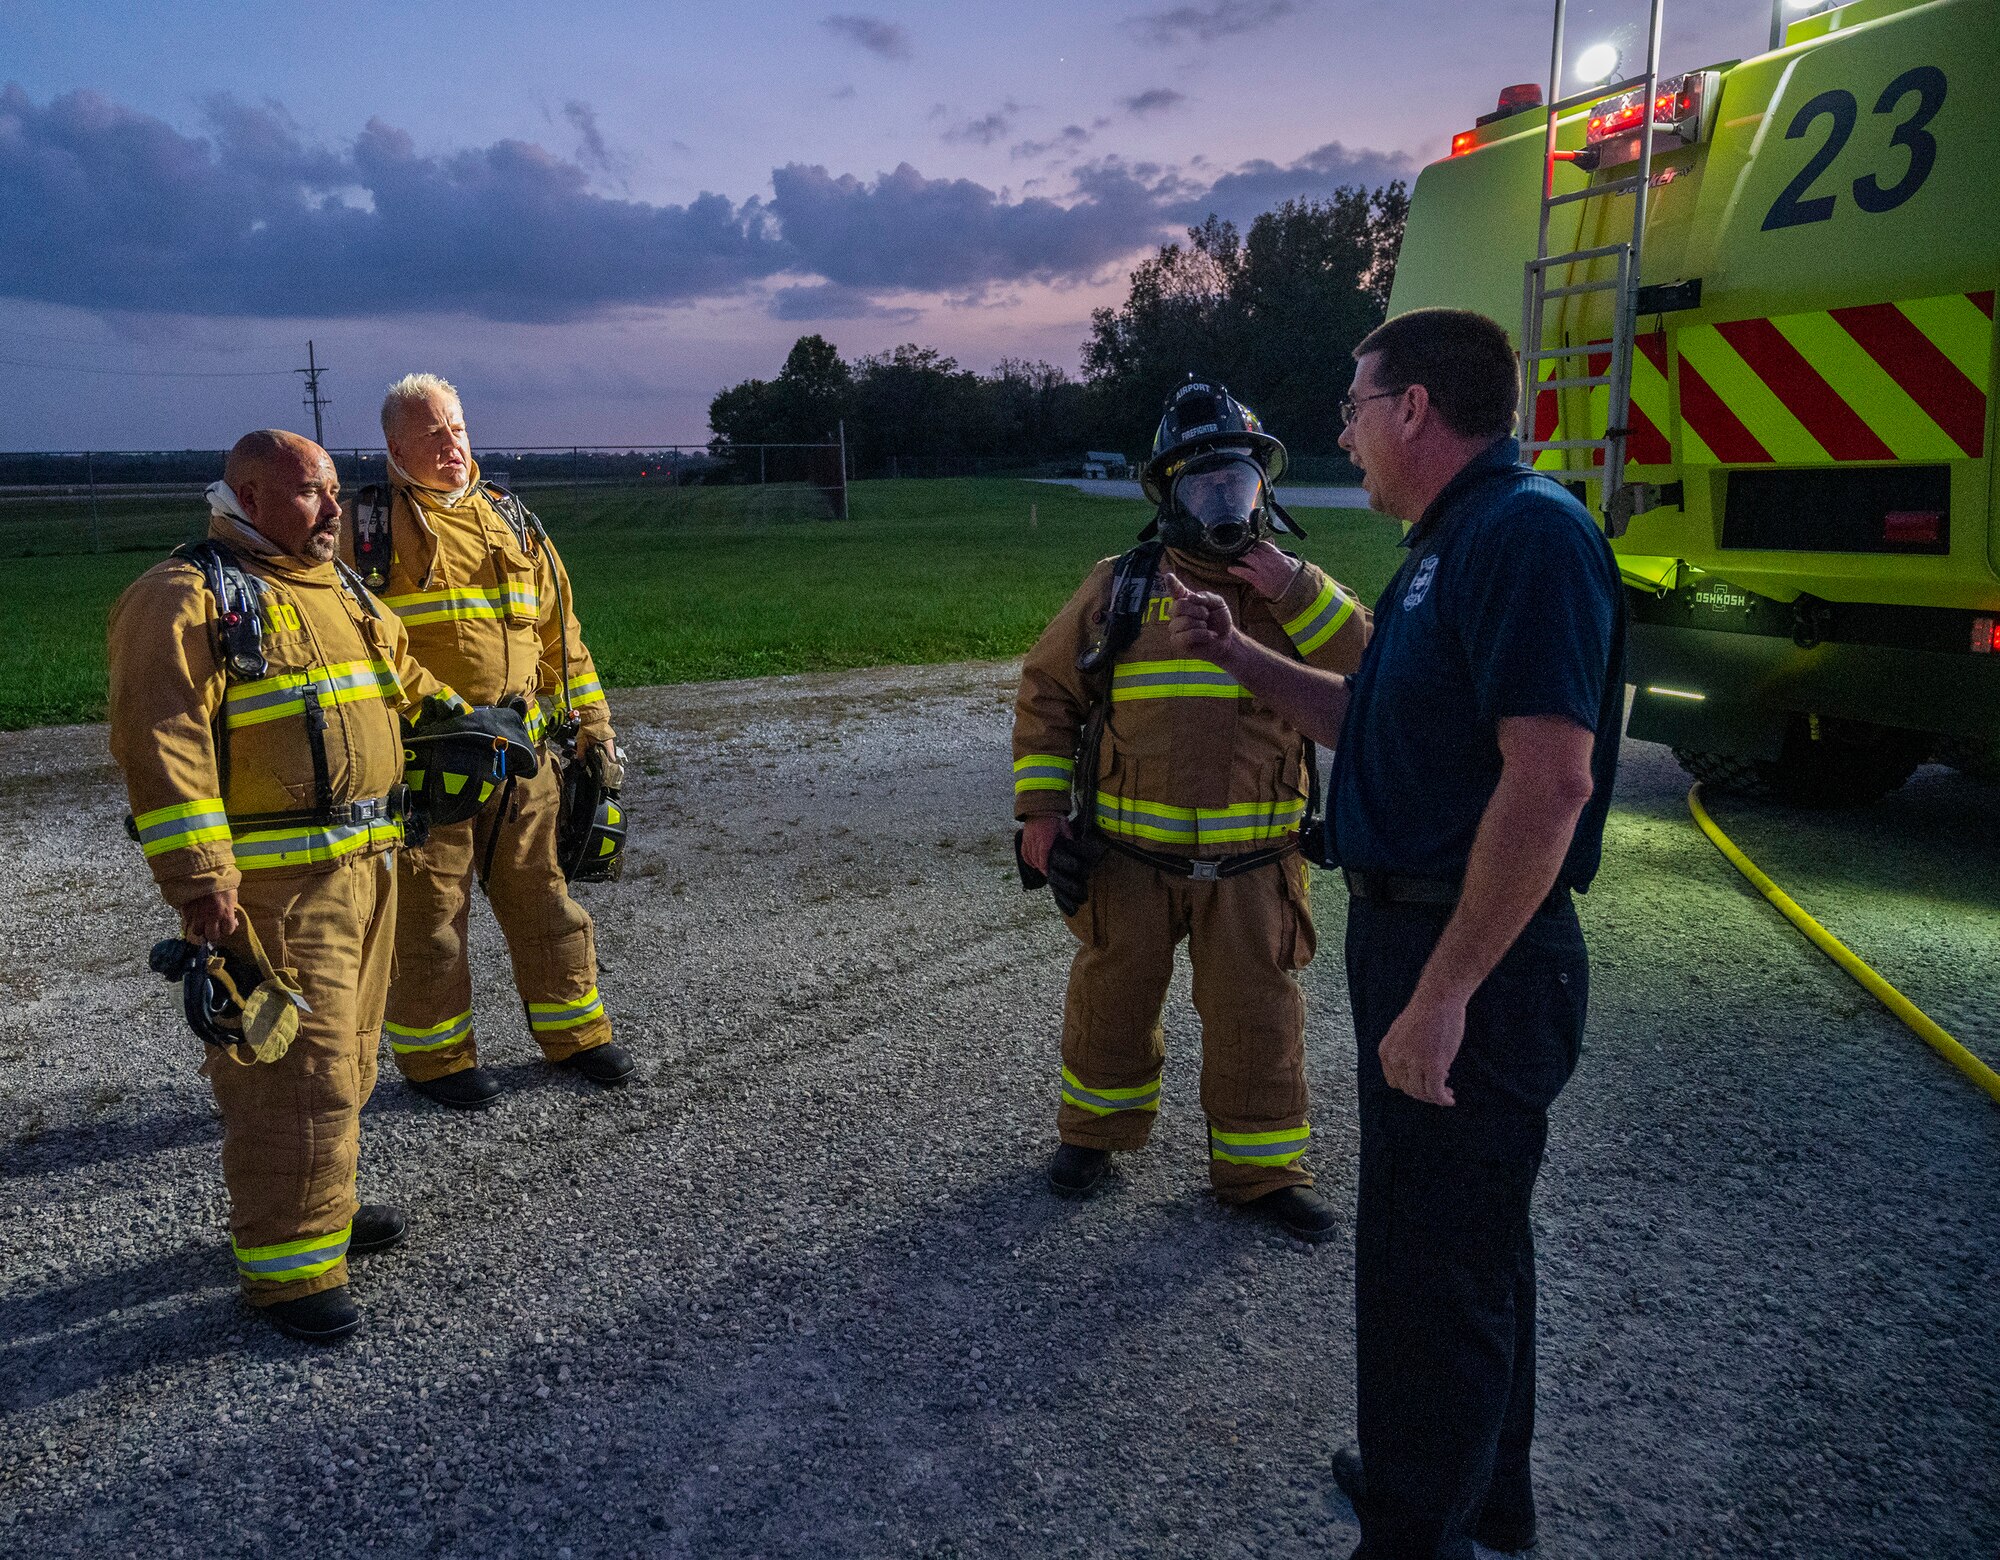 Dayton International Airport Fire Department Chief Duane Stitzel (right) talks with some of his firefighters Oct. 5, 2021, between live training fires at Wright-Patterson Air Force Base, Ohio. The 788th Civil Engineer Squadron Fire Department hosts outside agencies, including fire departments from the Springfield, Columbus and Dayton airports, to give them the opportunity to work on aircraft-fire skills. (U.S. Air Force photo by R.J. Oriez)